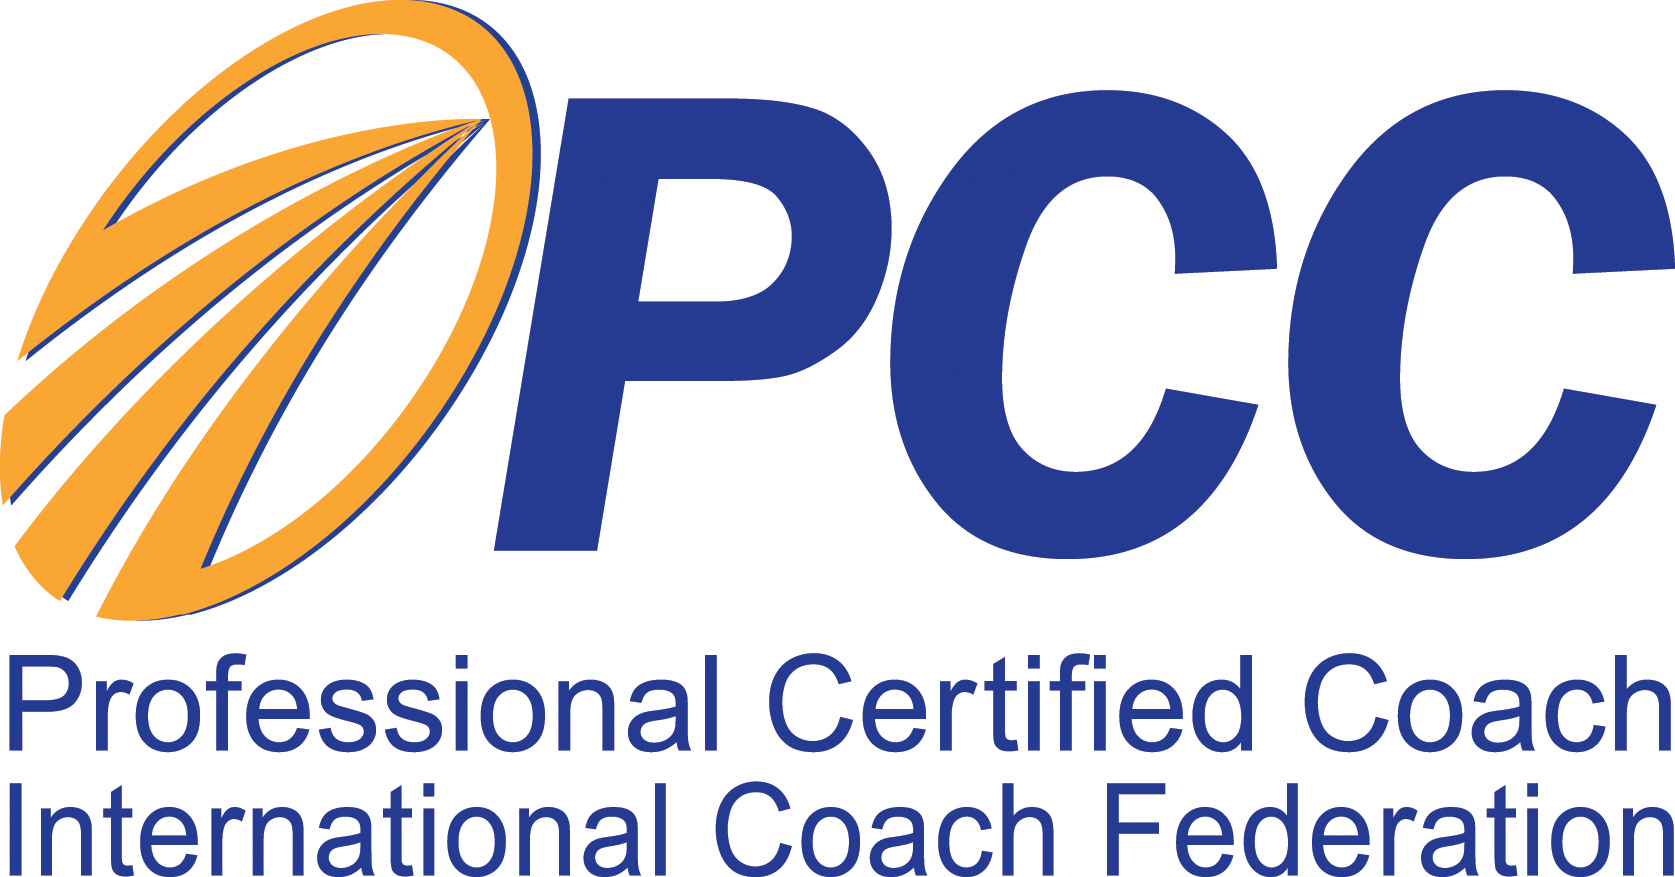 Personal Certified Coach